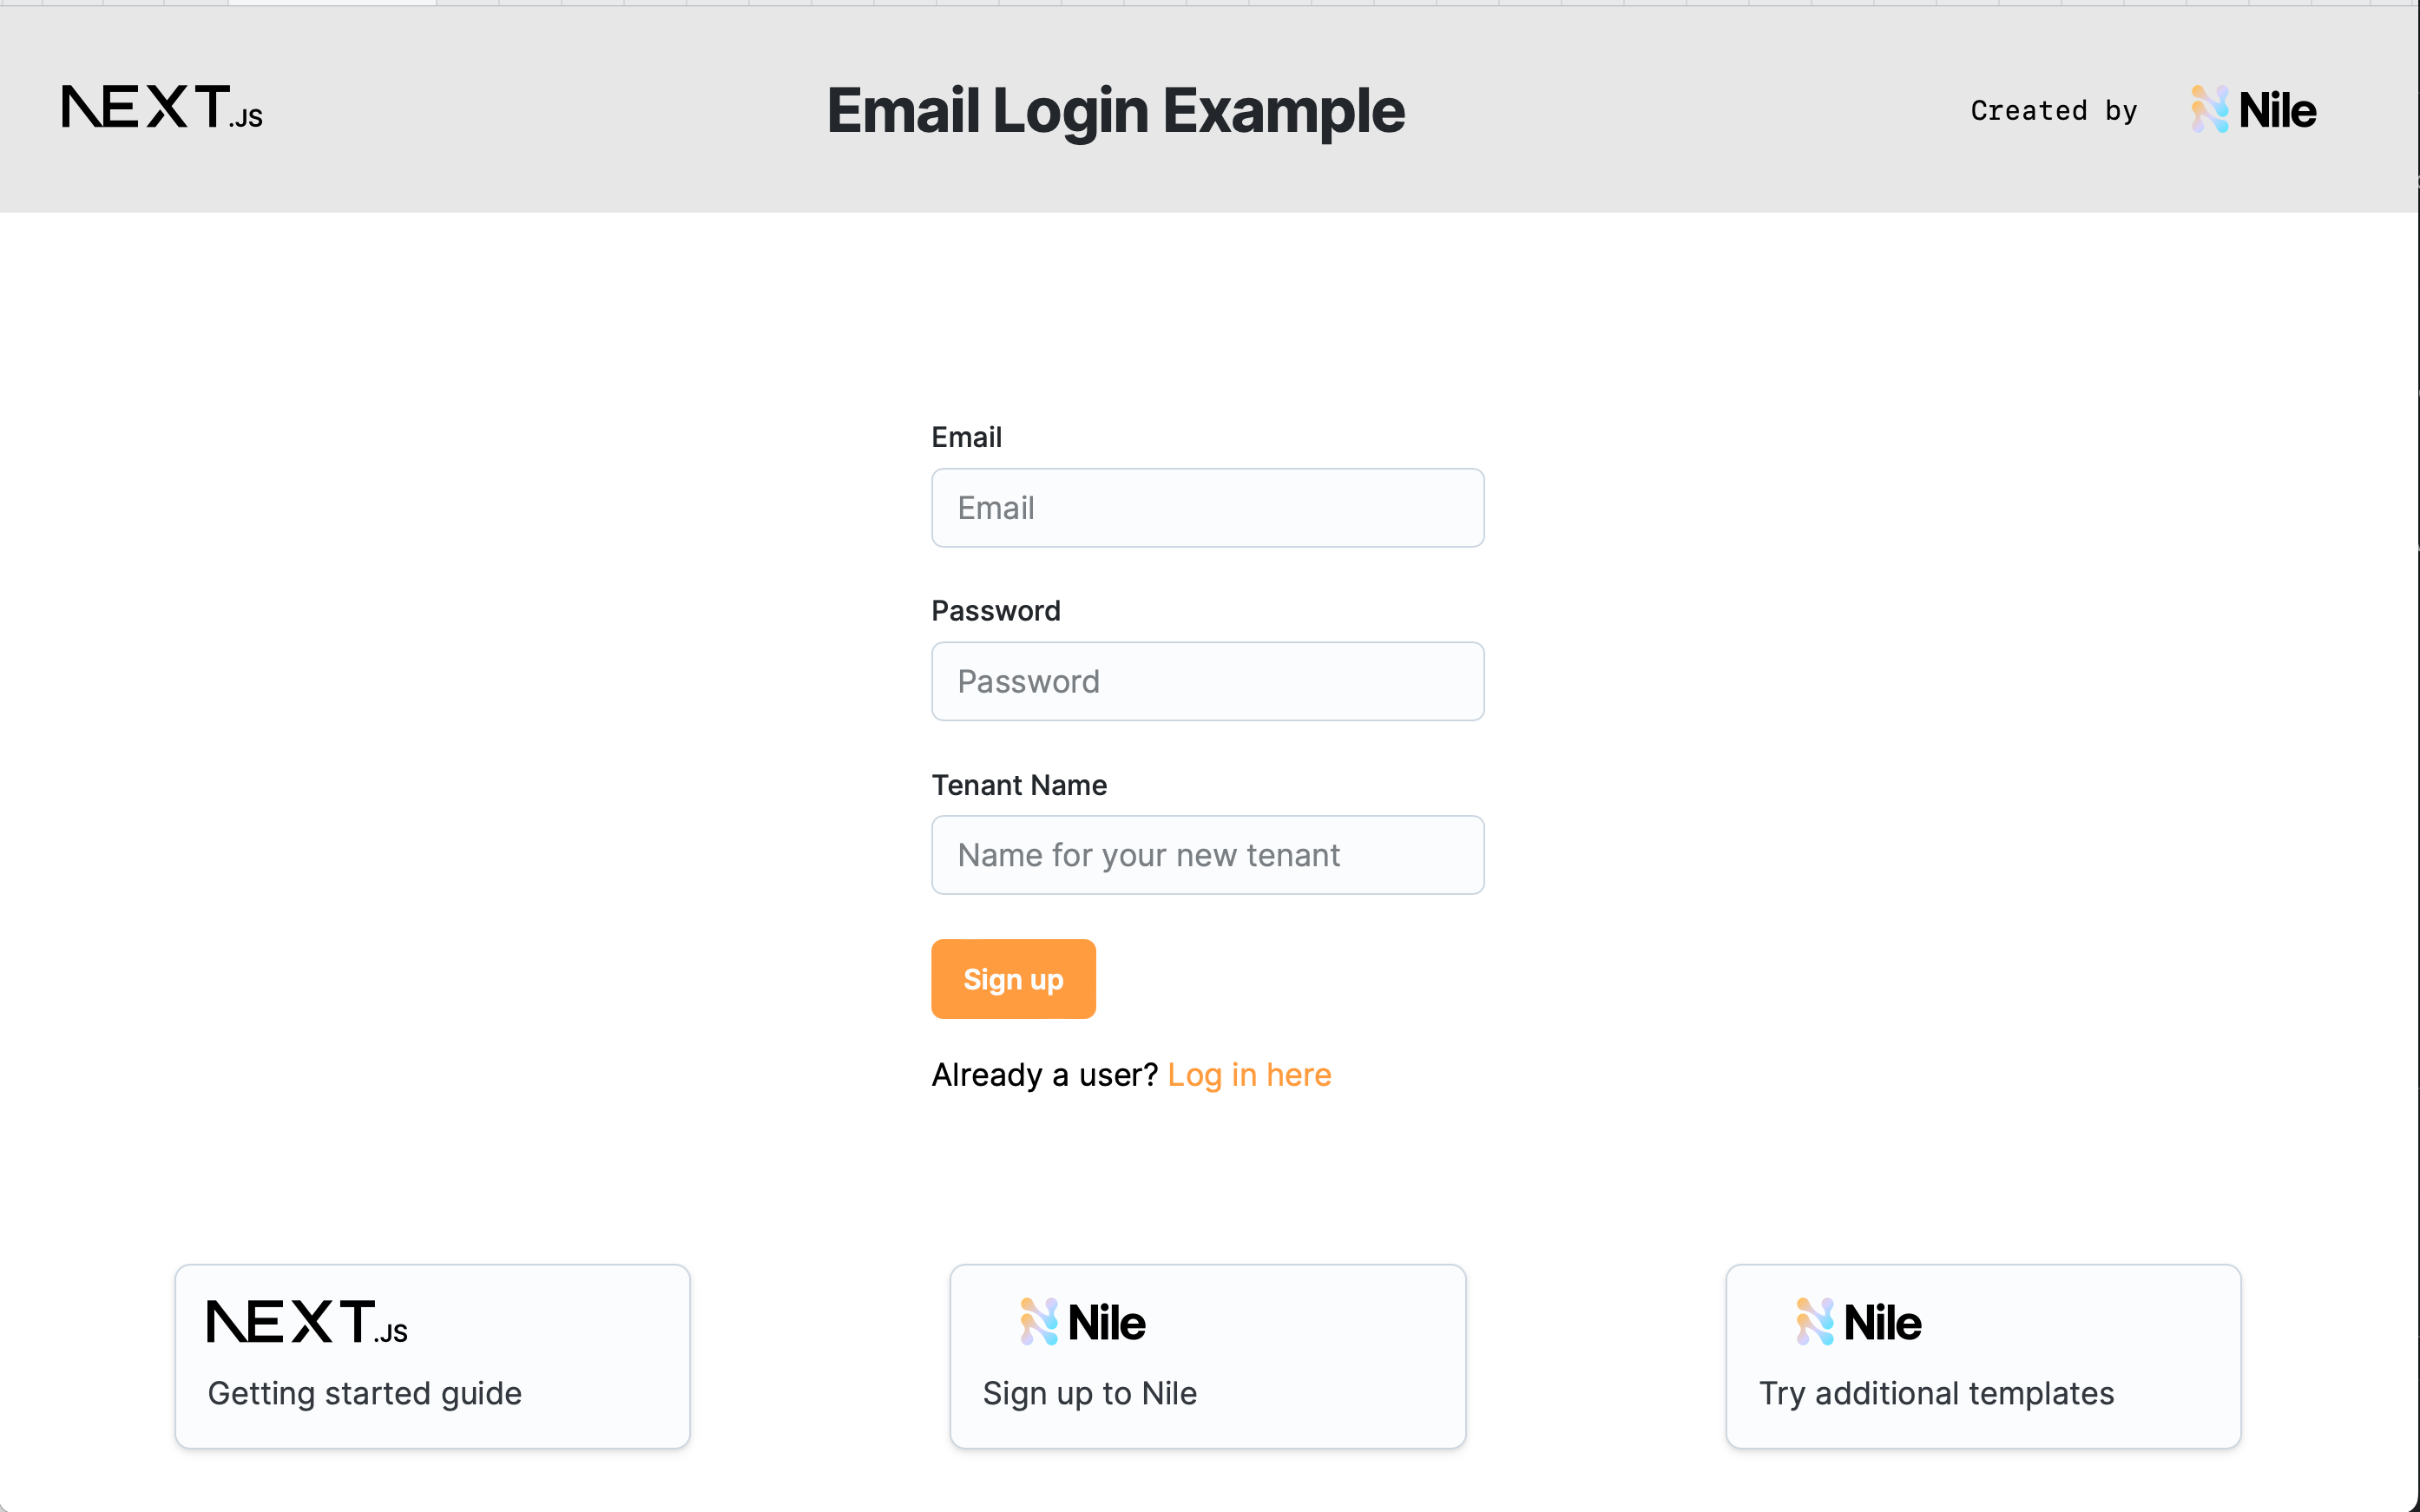 Email Login Example for multi-tenant application